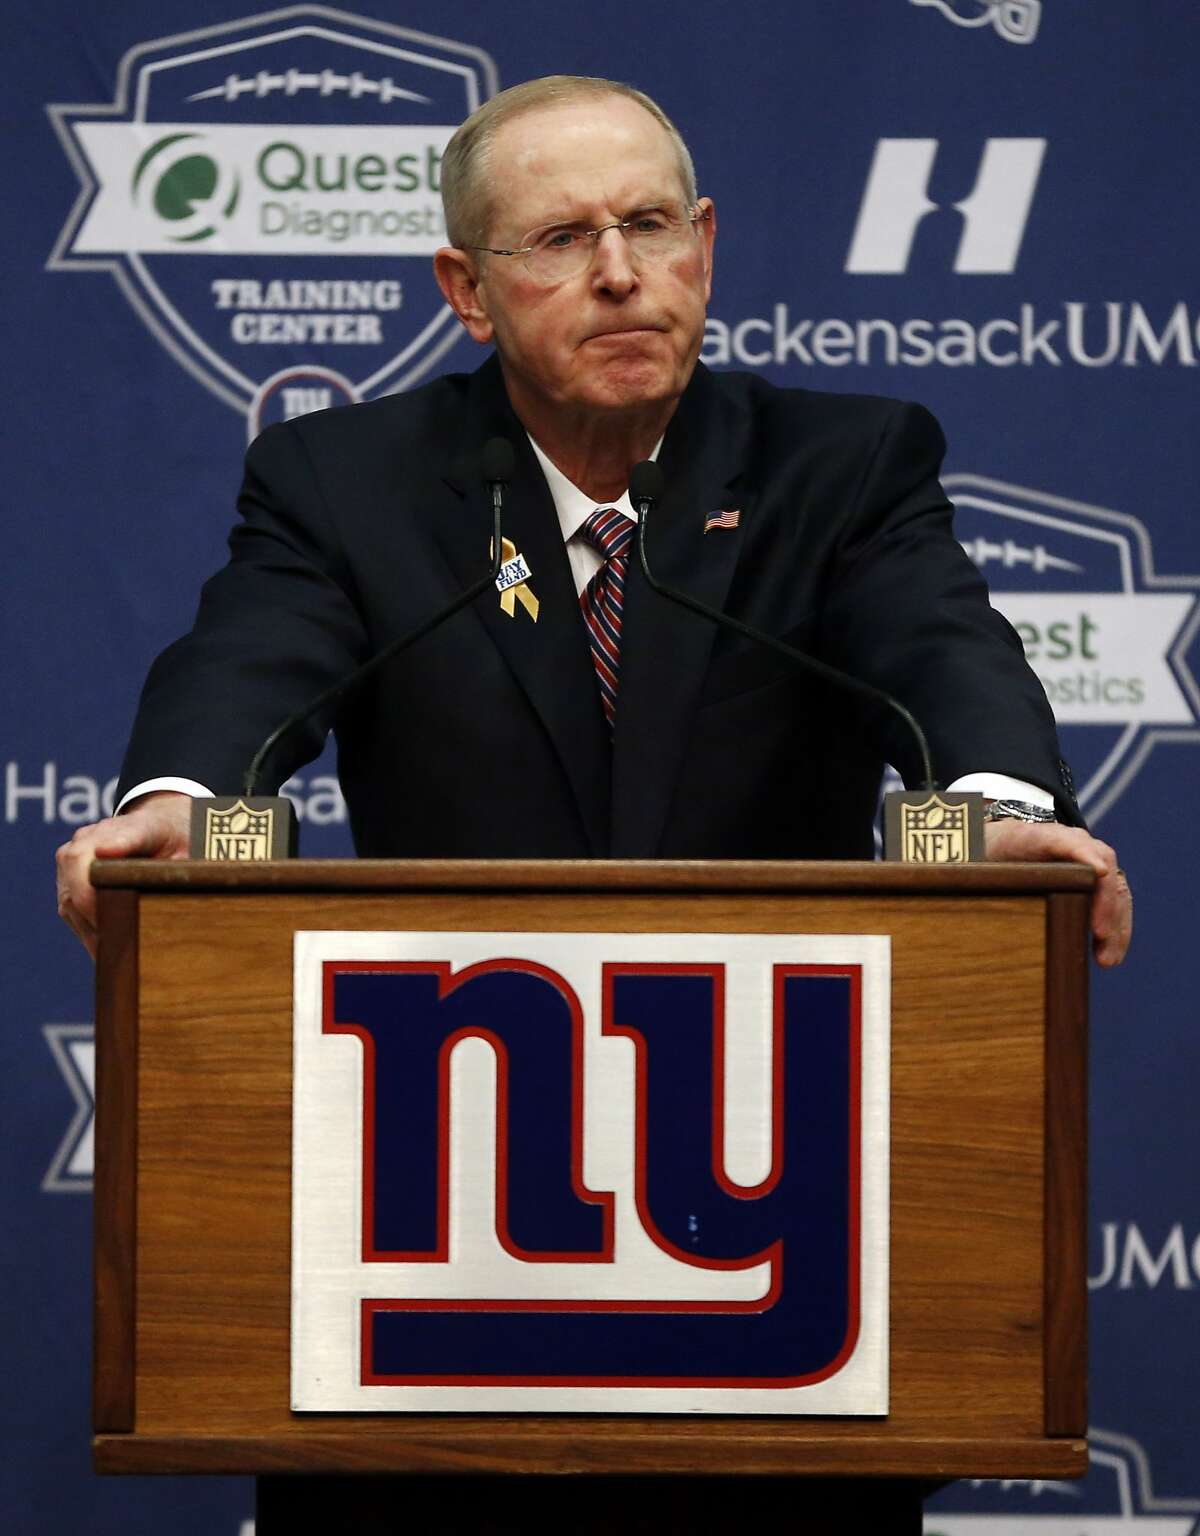 Former New York Giants head coach Tom Coughlin speaks during a news conference, Tuesday, Jan. 5, 2016, in East Rutherford, N.J. (AP Photo/Julio Cortez)